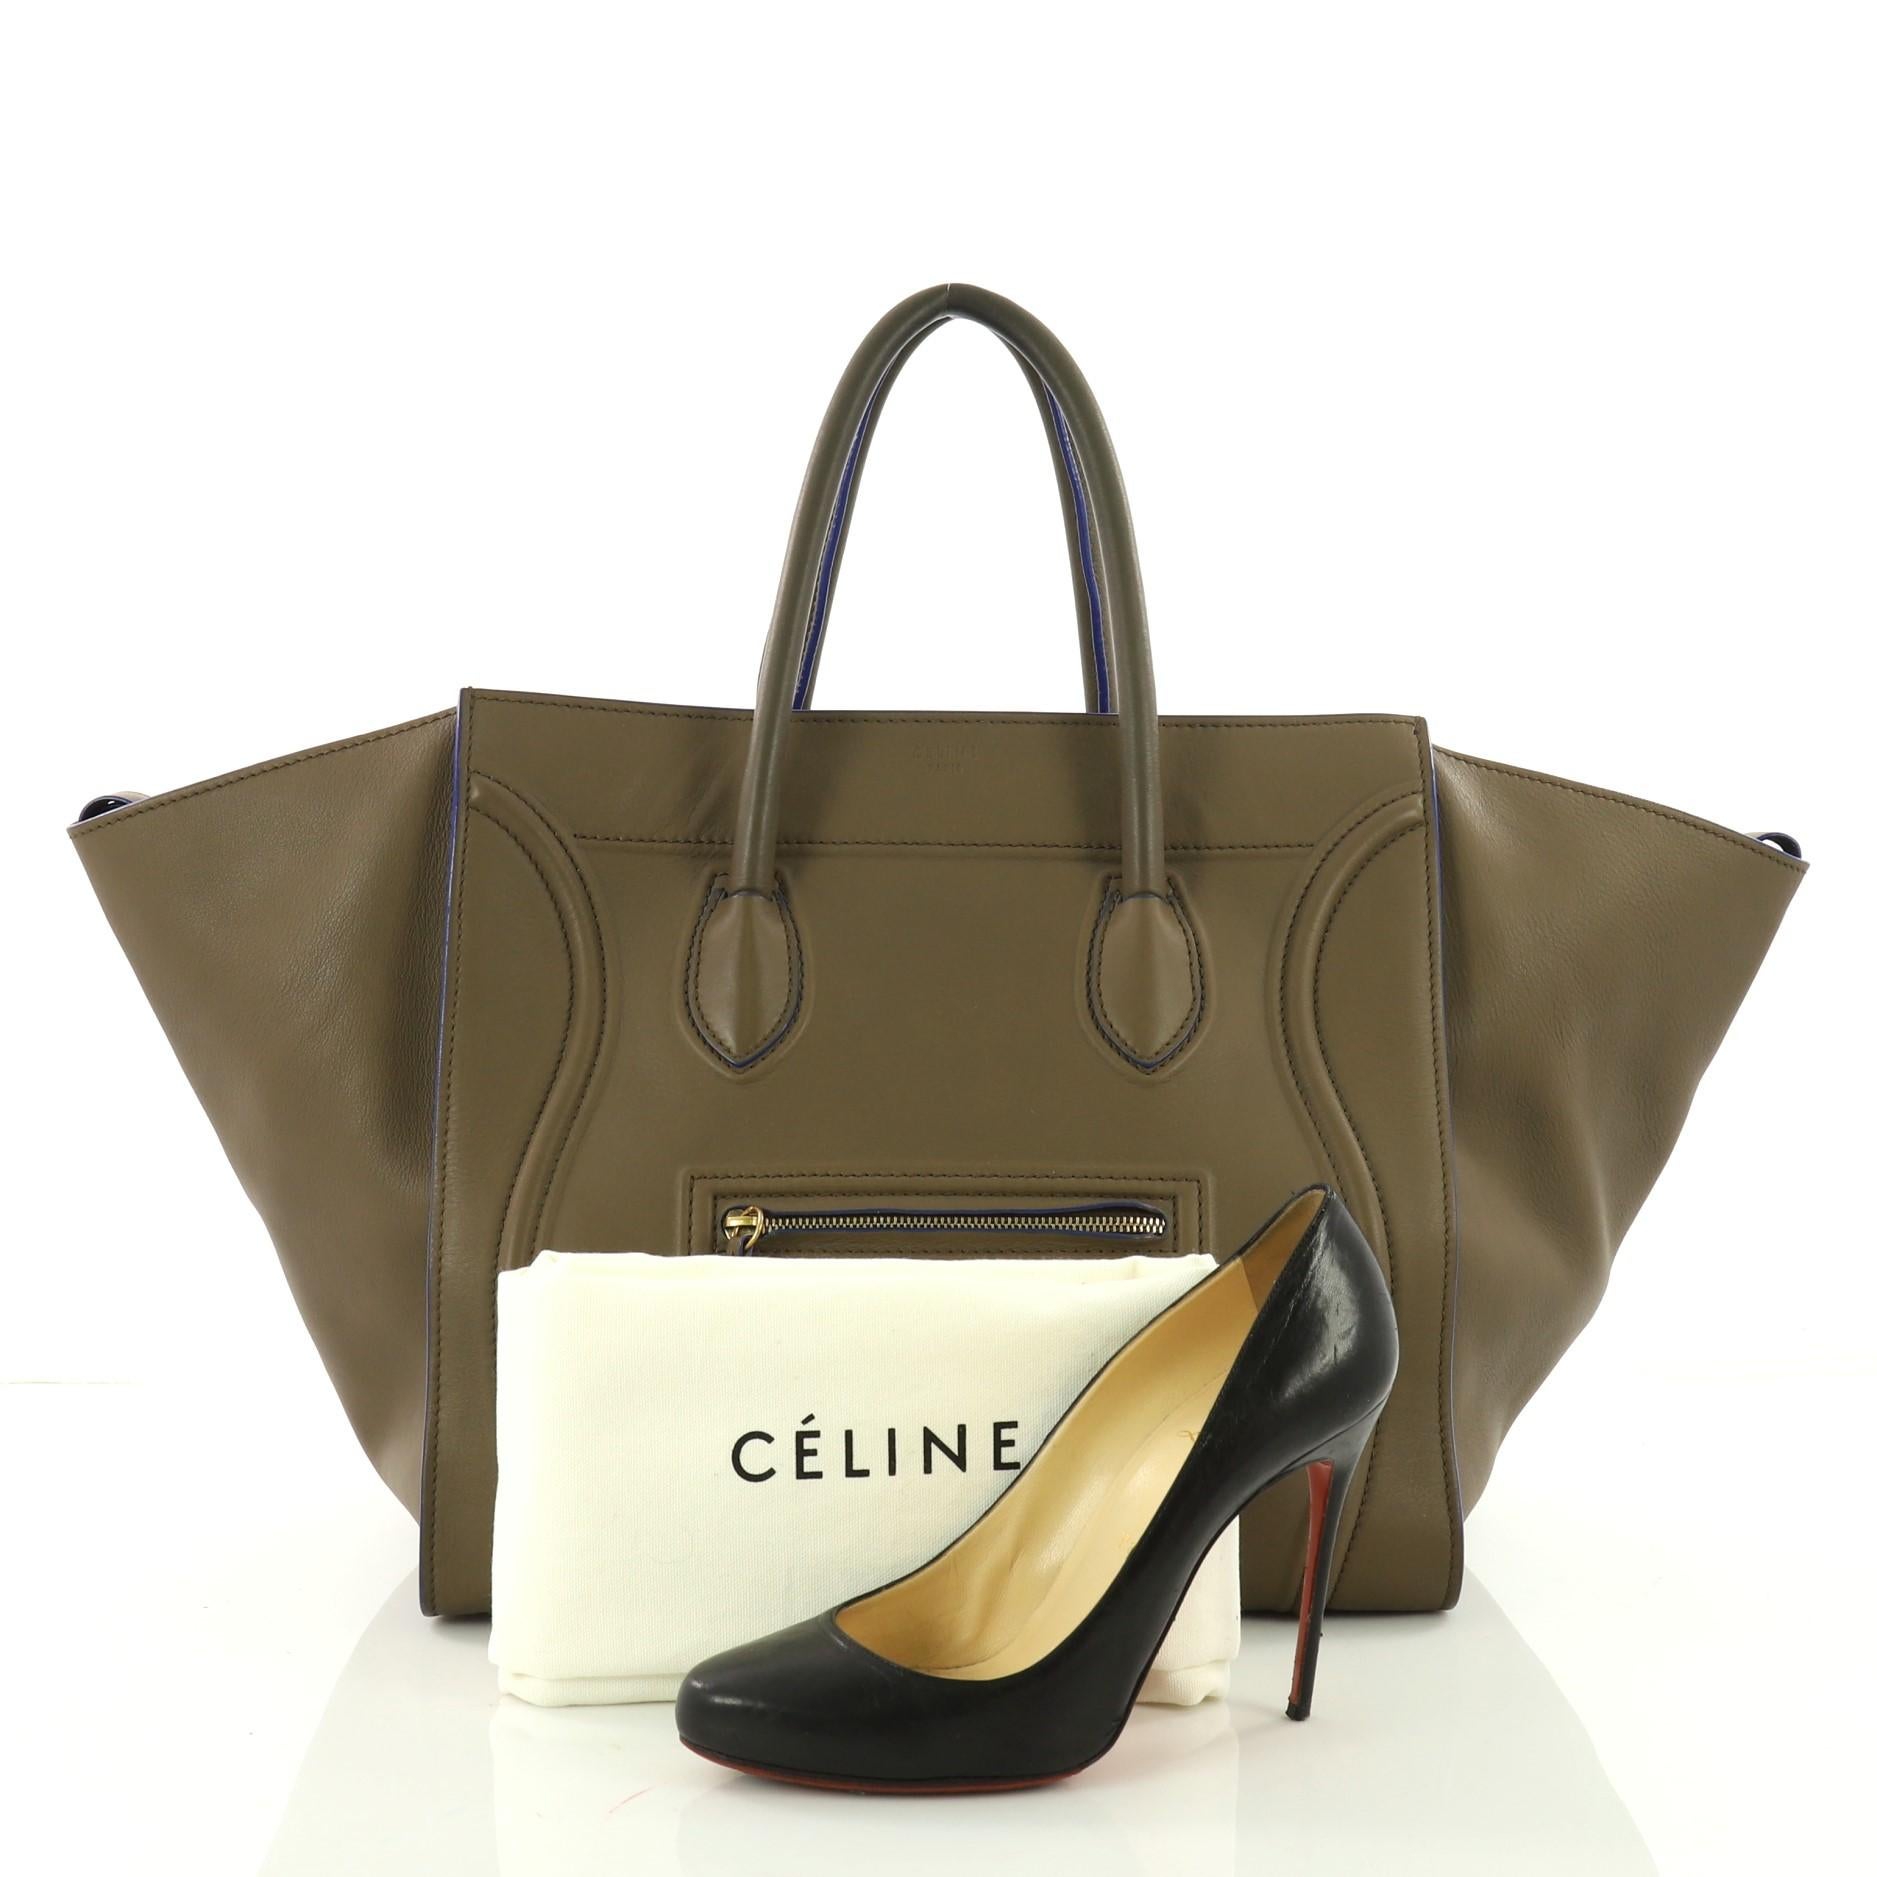 This authentic Celine Phantom Handbag Smooth Leather Large is one of the most sought-after bags beloved by fashionistas. Crafted from taupe smooth leather, this  tote features dual-rolled handles, an exterior front pocket, protective base studs,